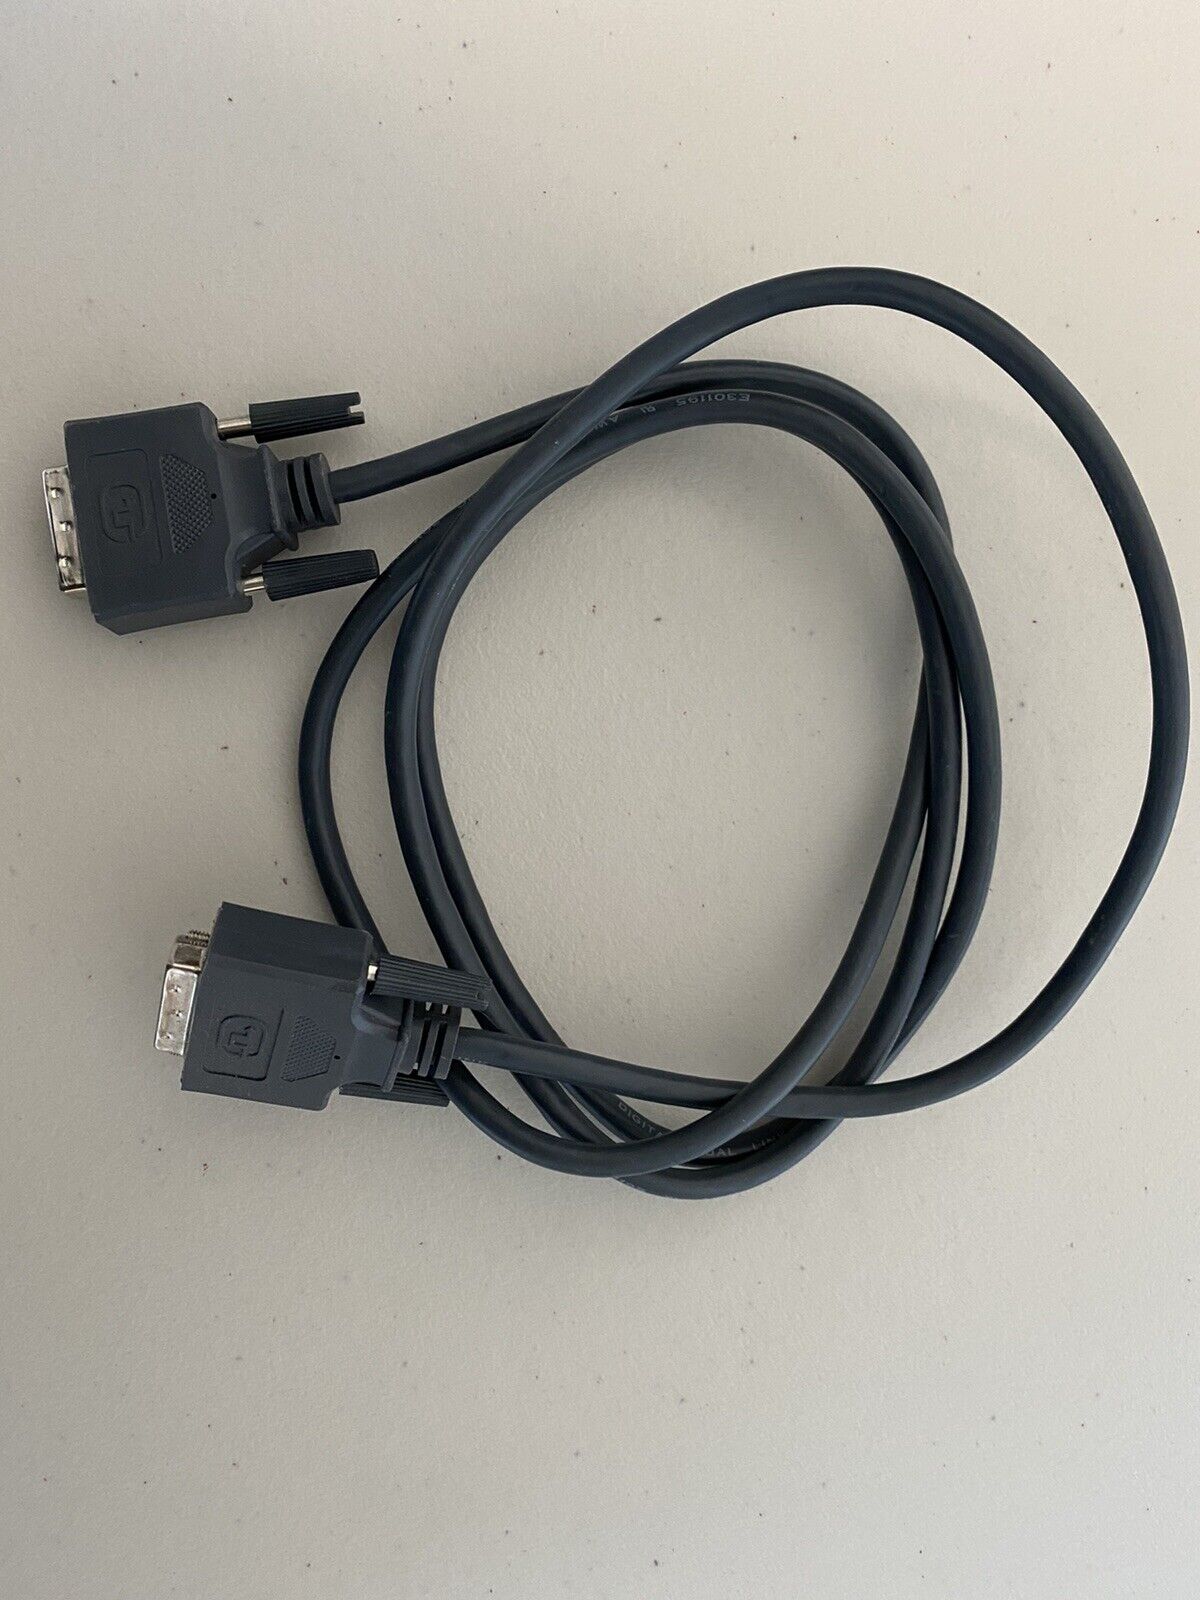 Premium DVI to DVI Cable Monitor Cable Adapters 6 Feet